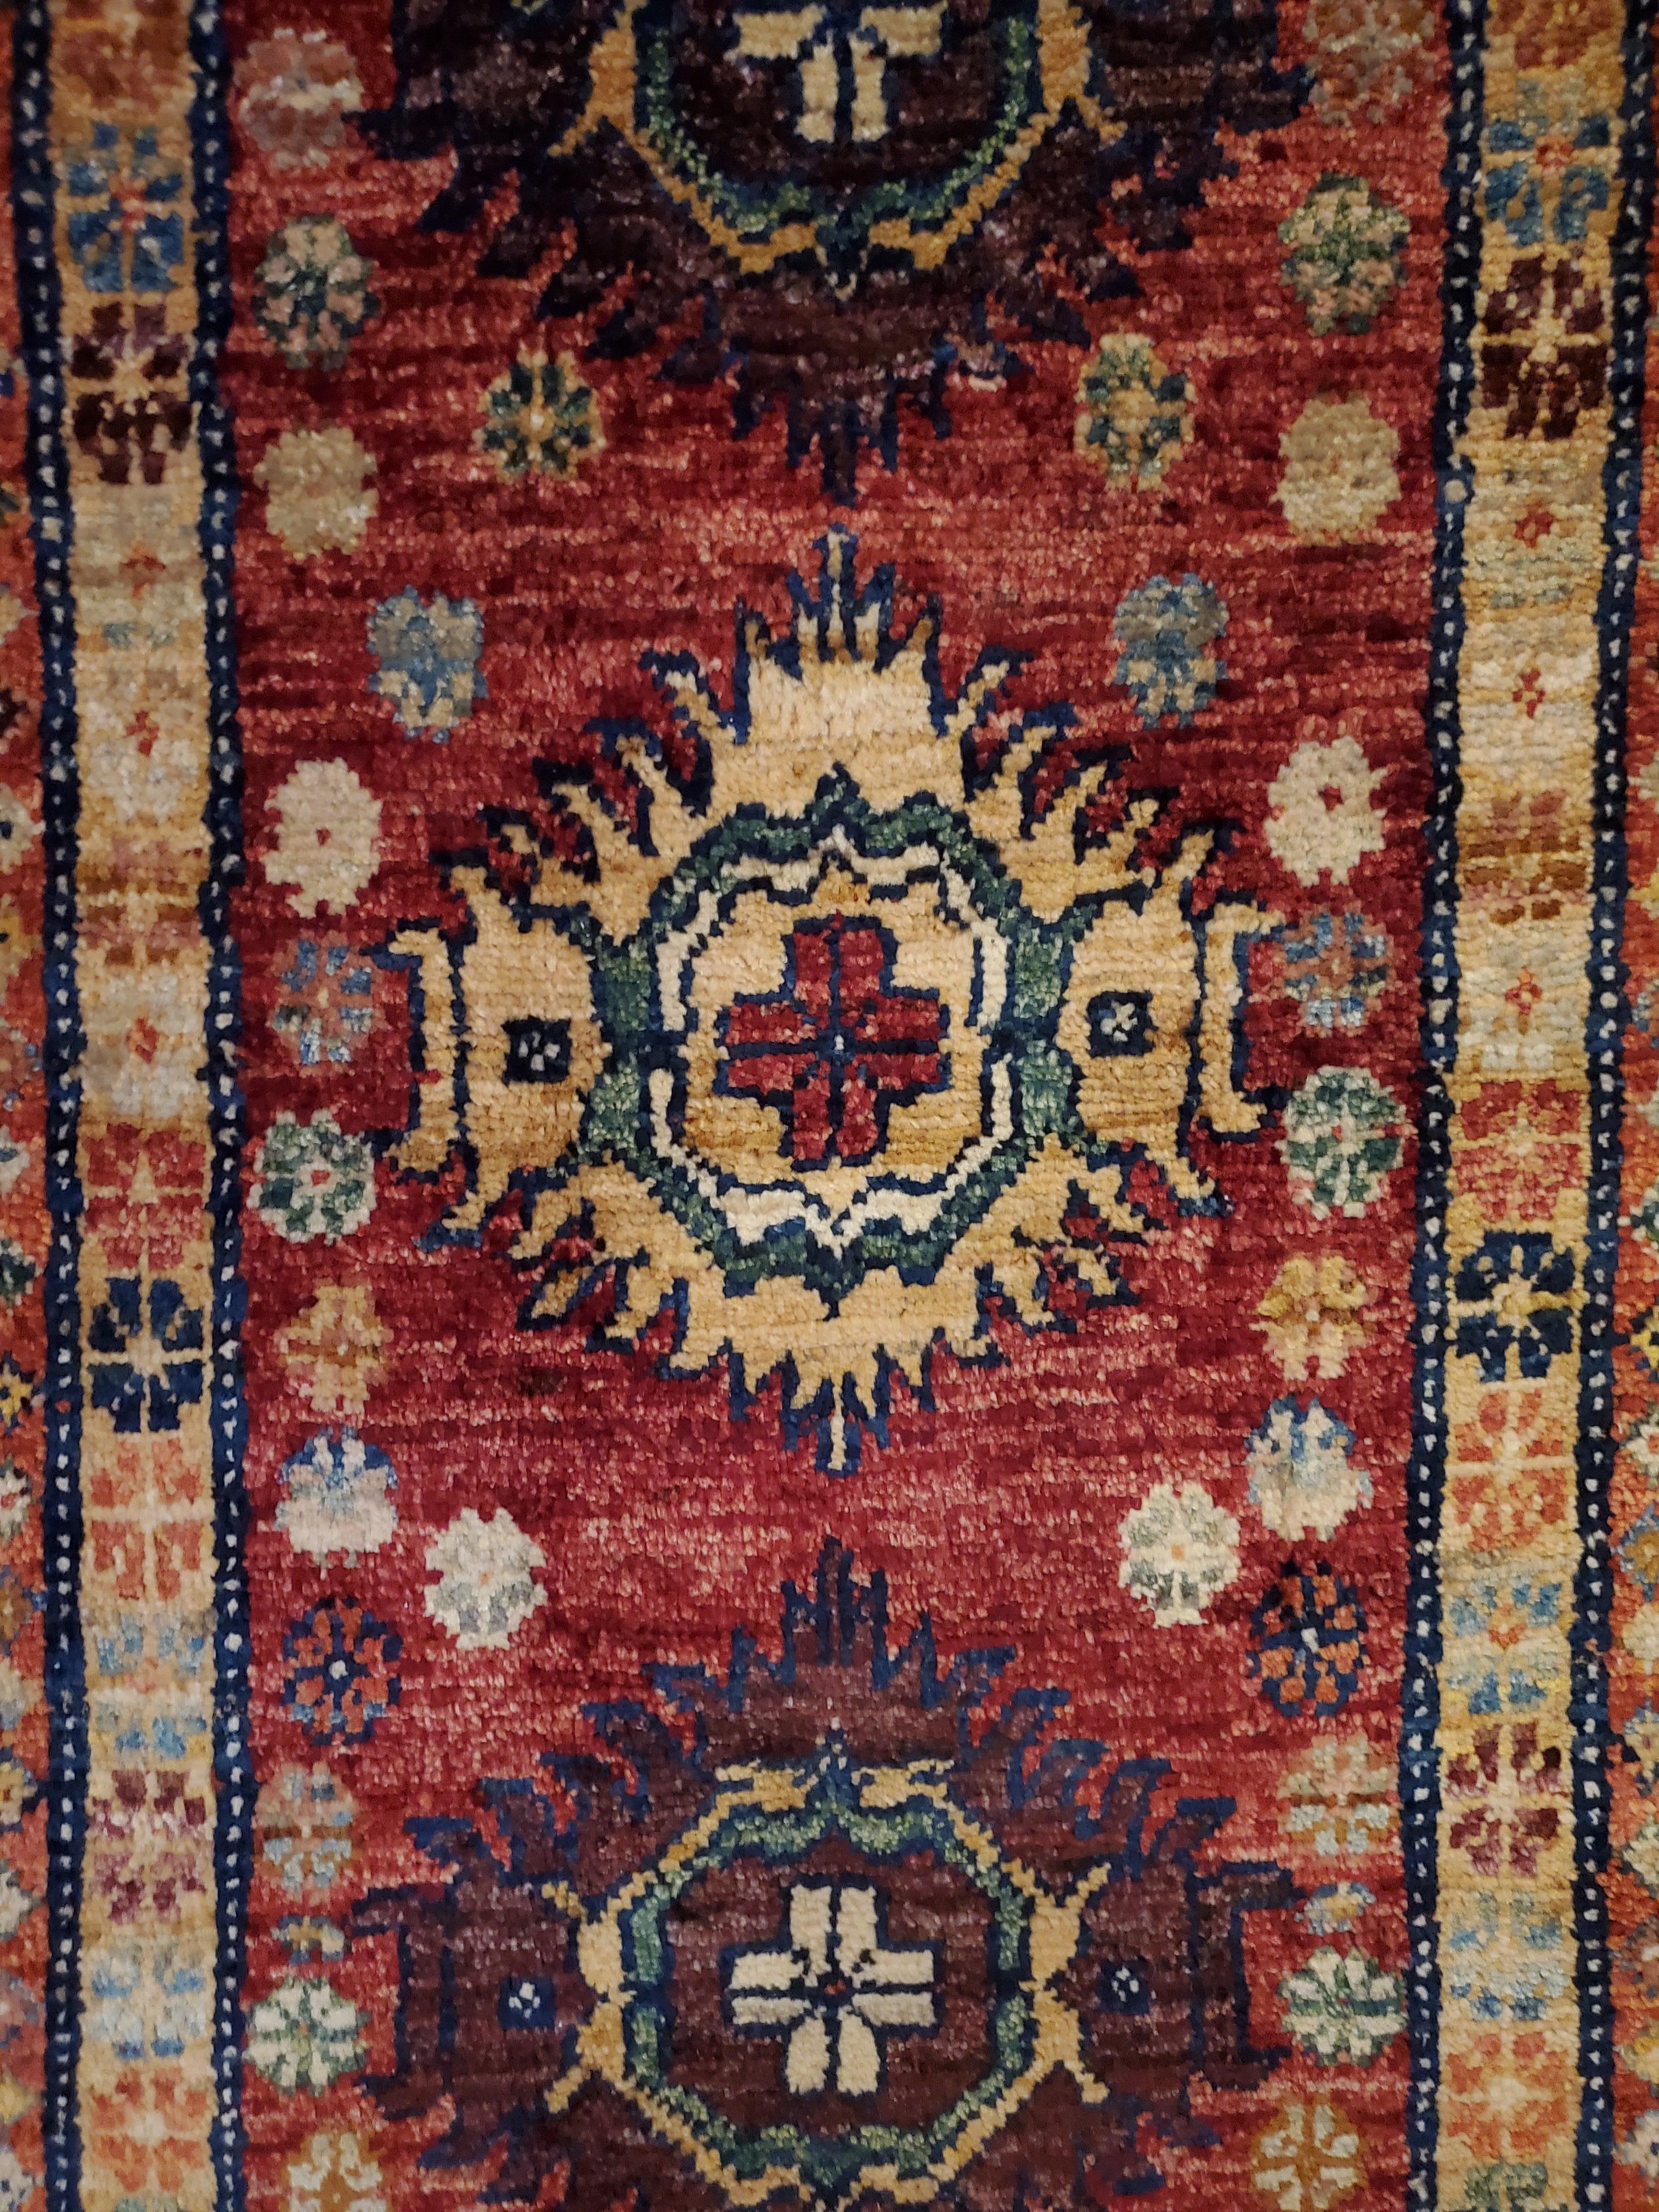 We carry some of the best Afghan bedside rugs, and if you are willing to give your space a colorful new look with one of our stunning carpets, we are here to help. This one measures approximately 40